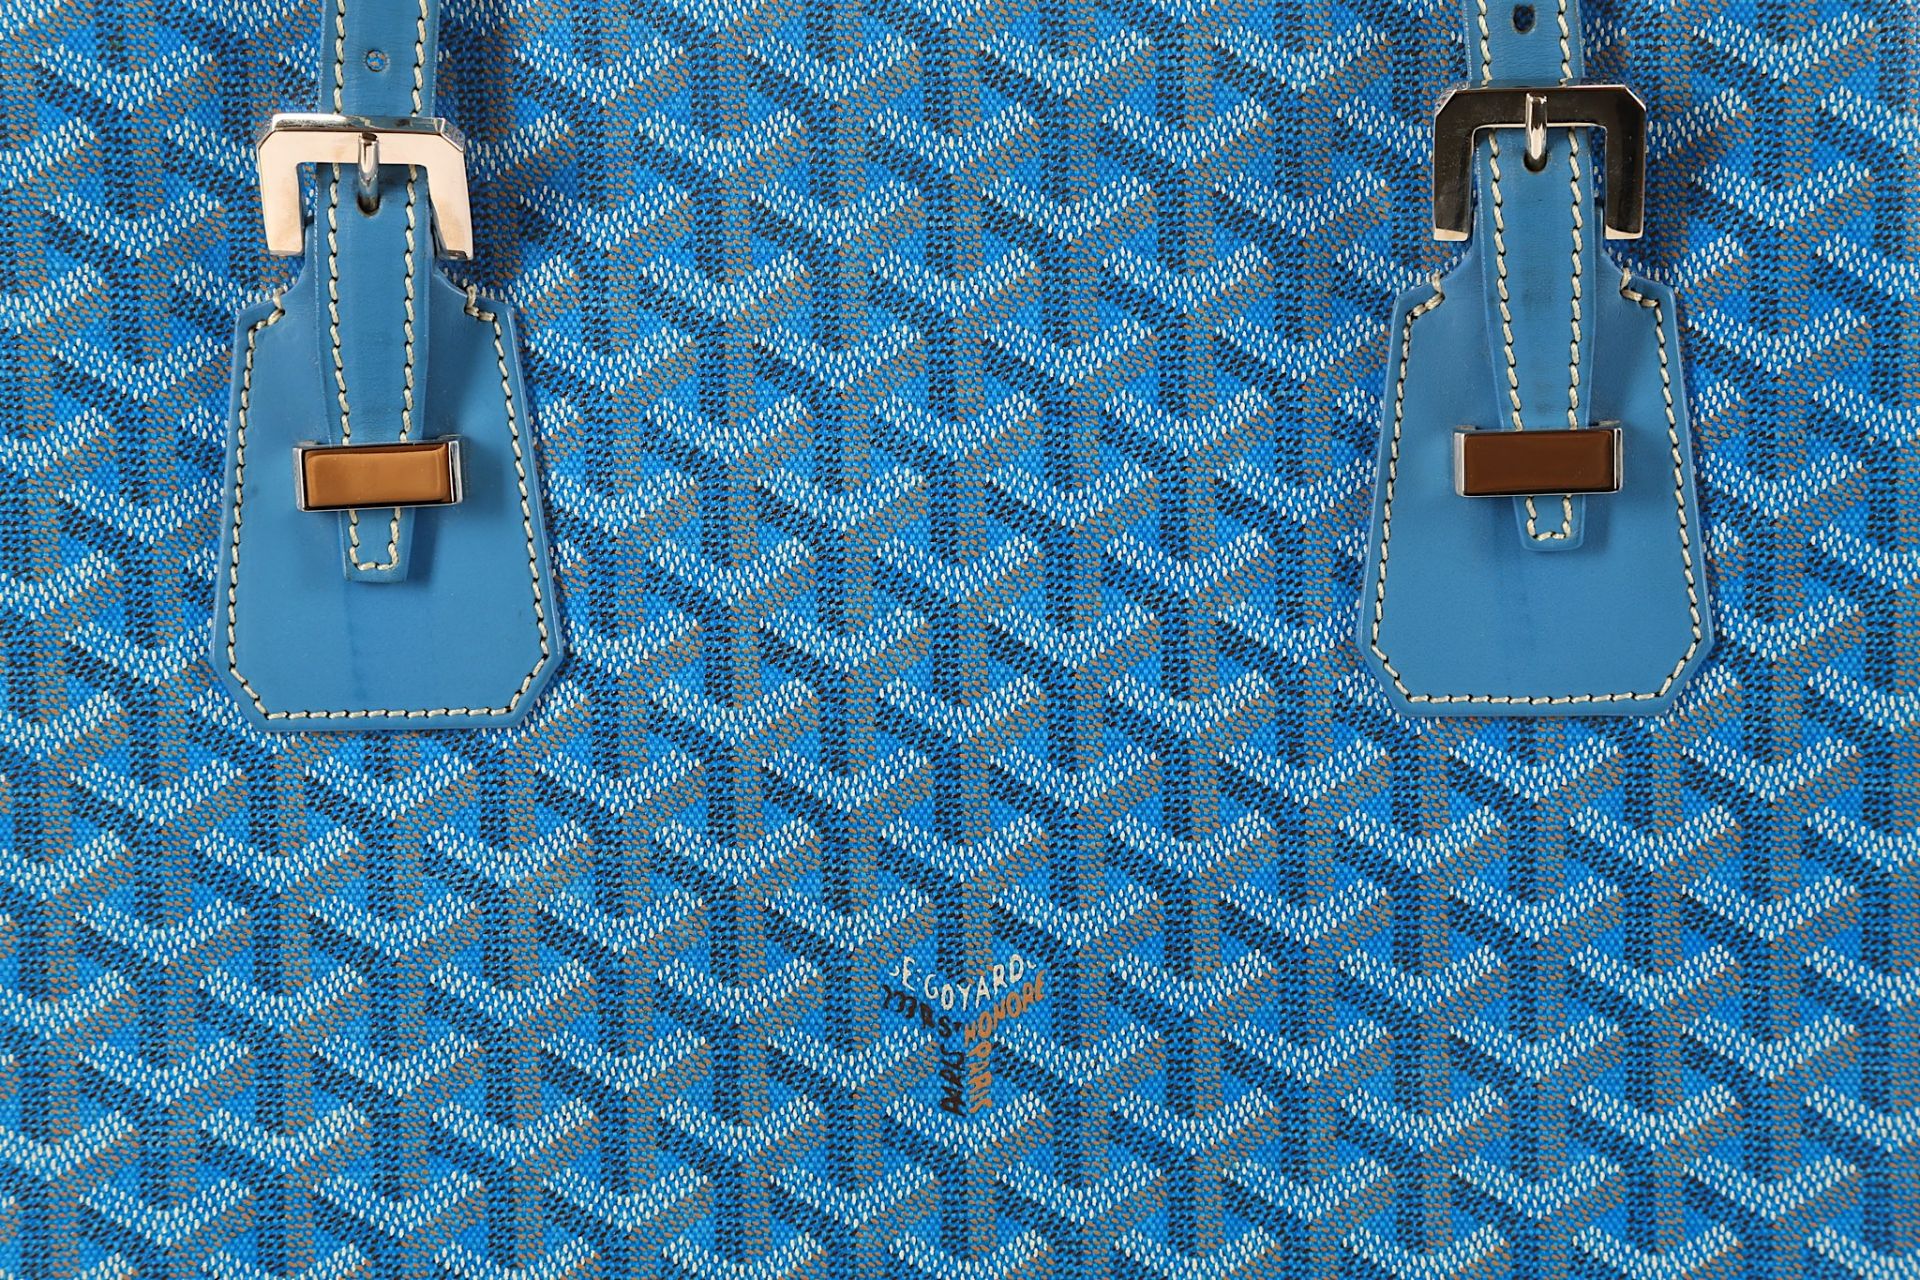 Goyard Blue Comores Tote Bag, hand painted coated - Image 2 of 5